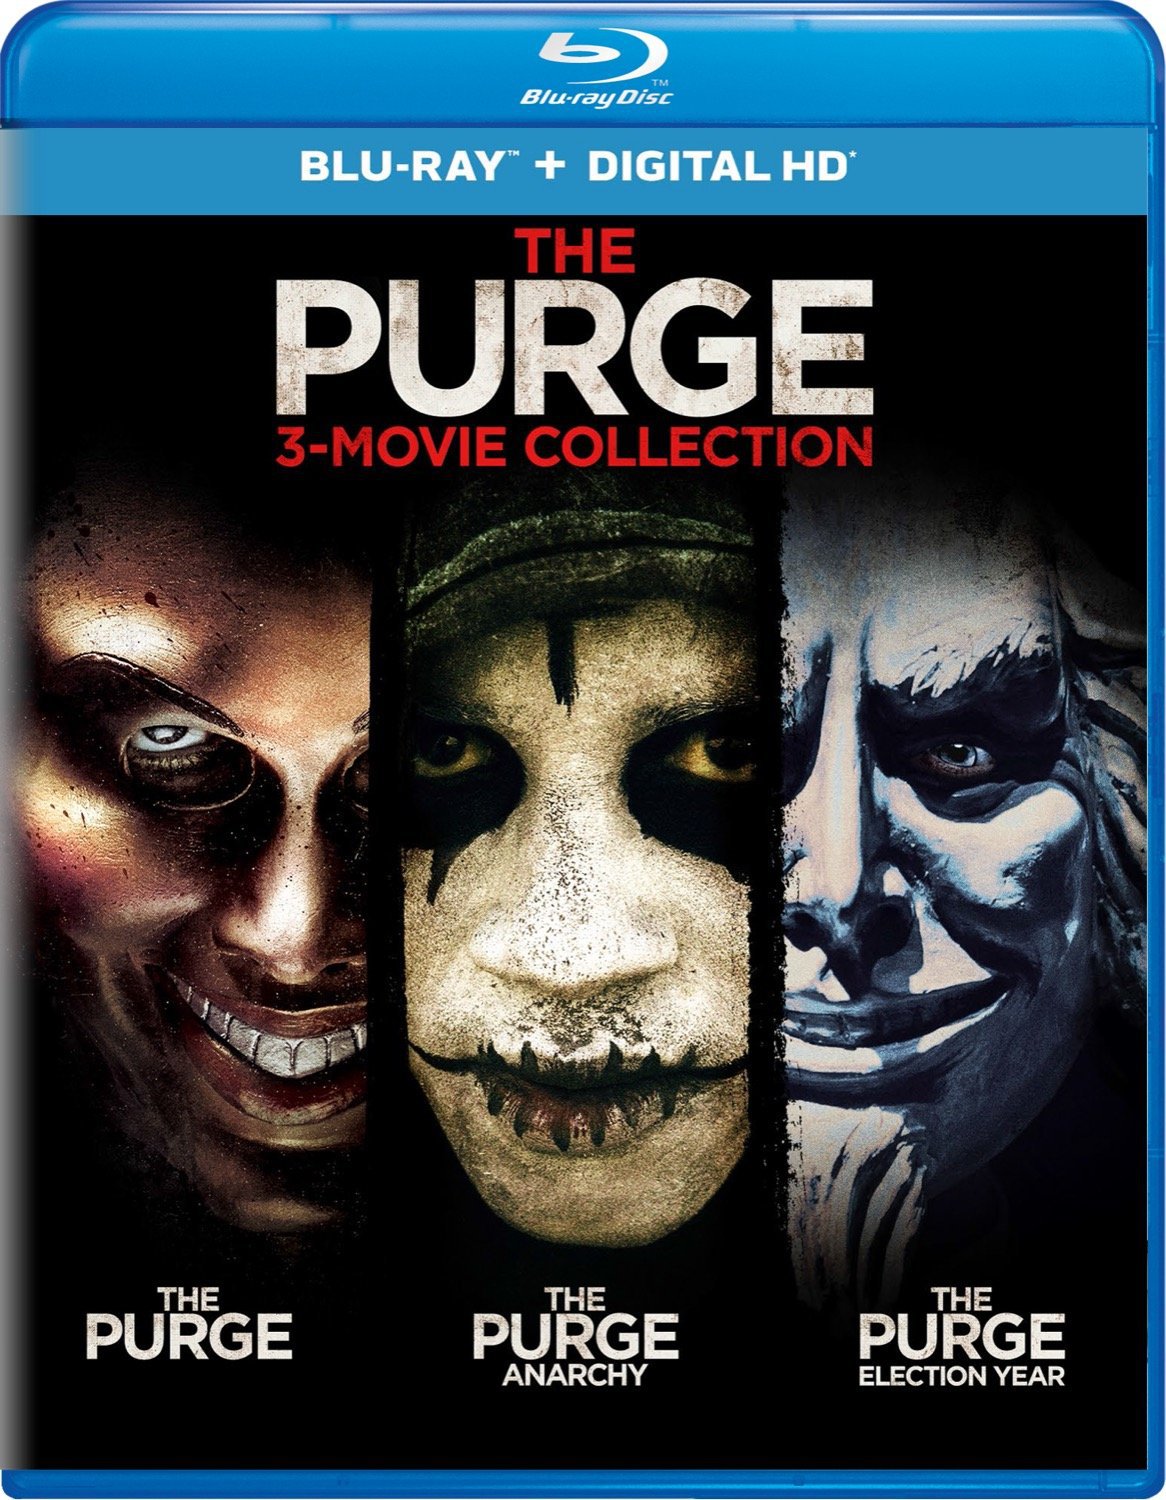 Purge 3-Movie Collection